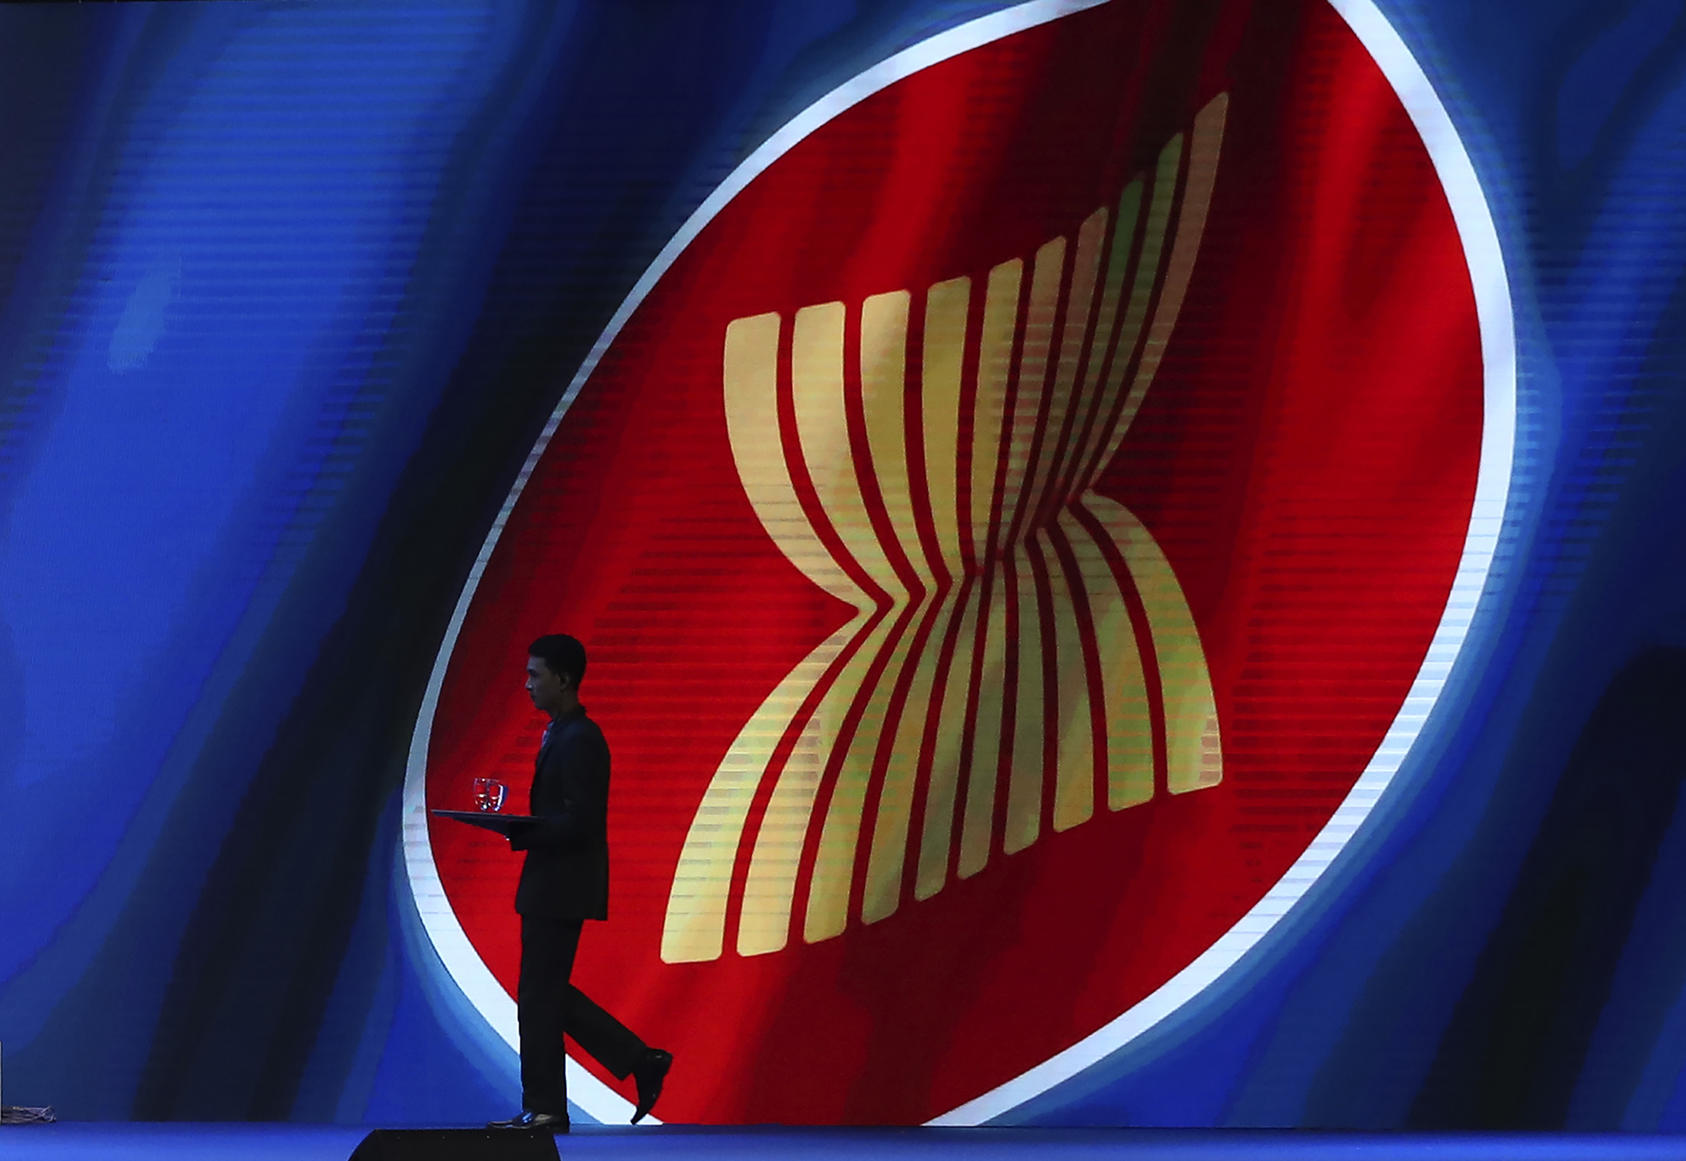 The ASEAN logo seen at the association’s Business and Investment Summit (ABIS) in Nonthaburi, Thailand, on November 2, 2019. (Photo by Aijaz Rahi/AP)